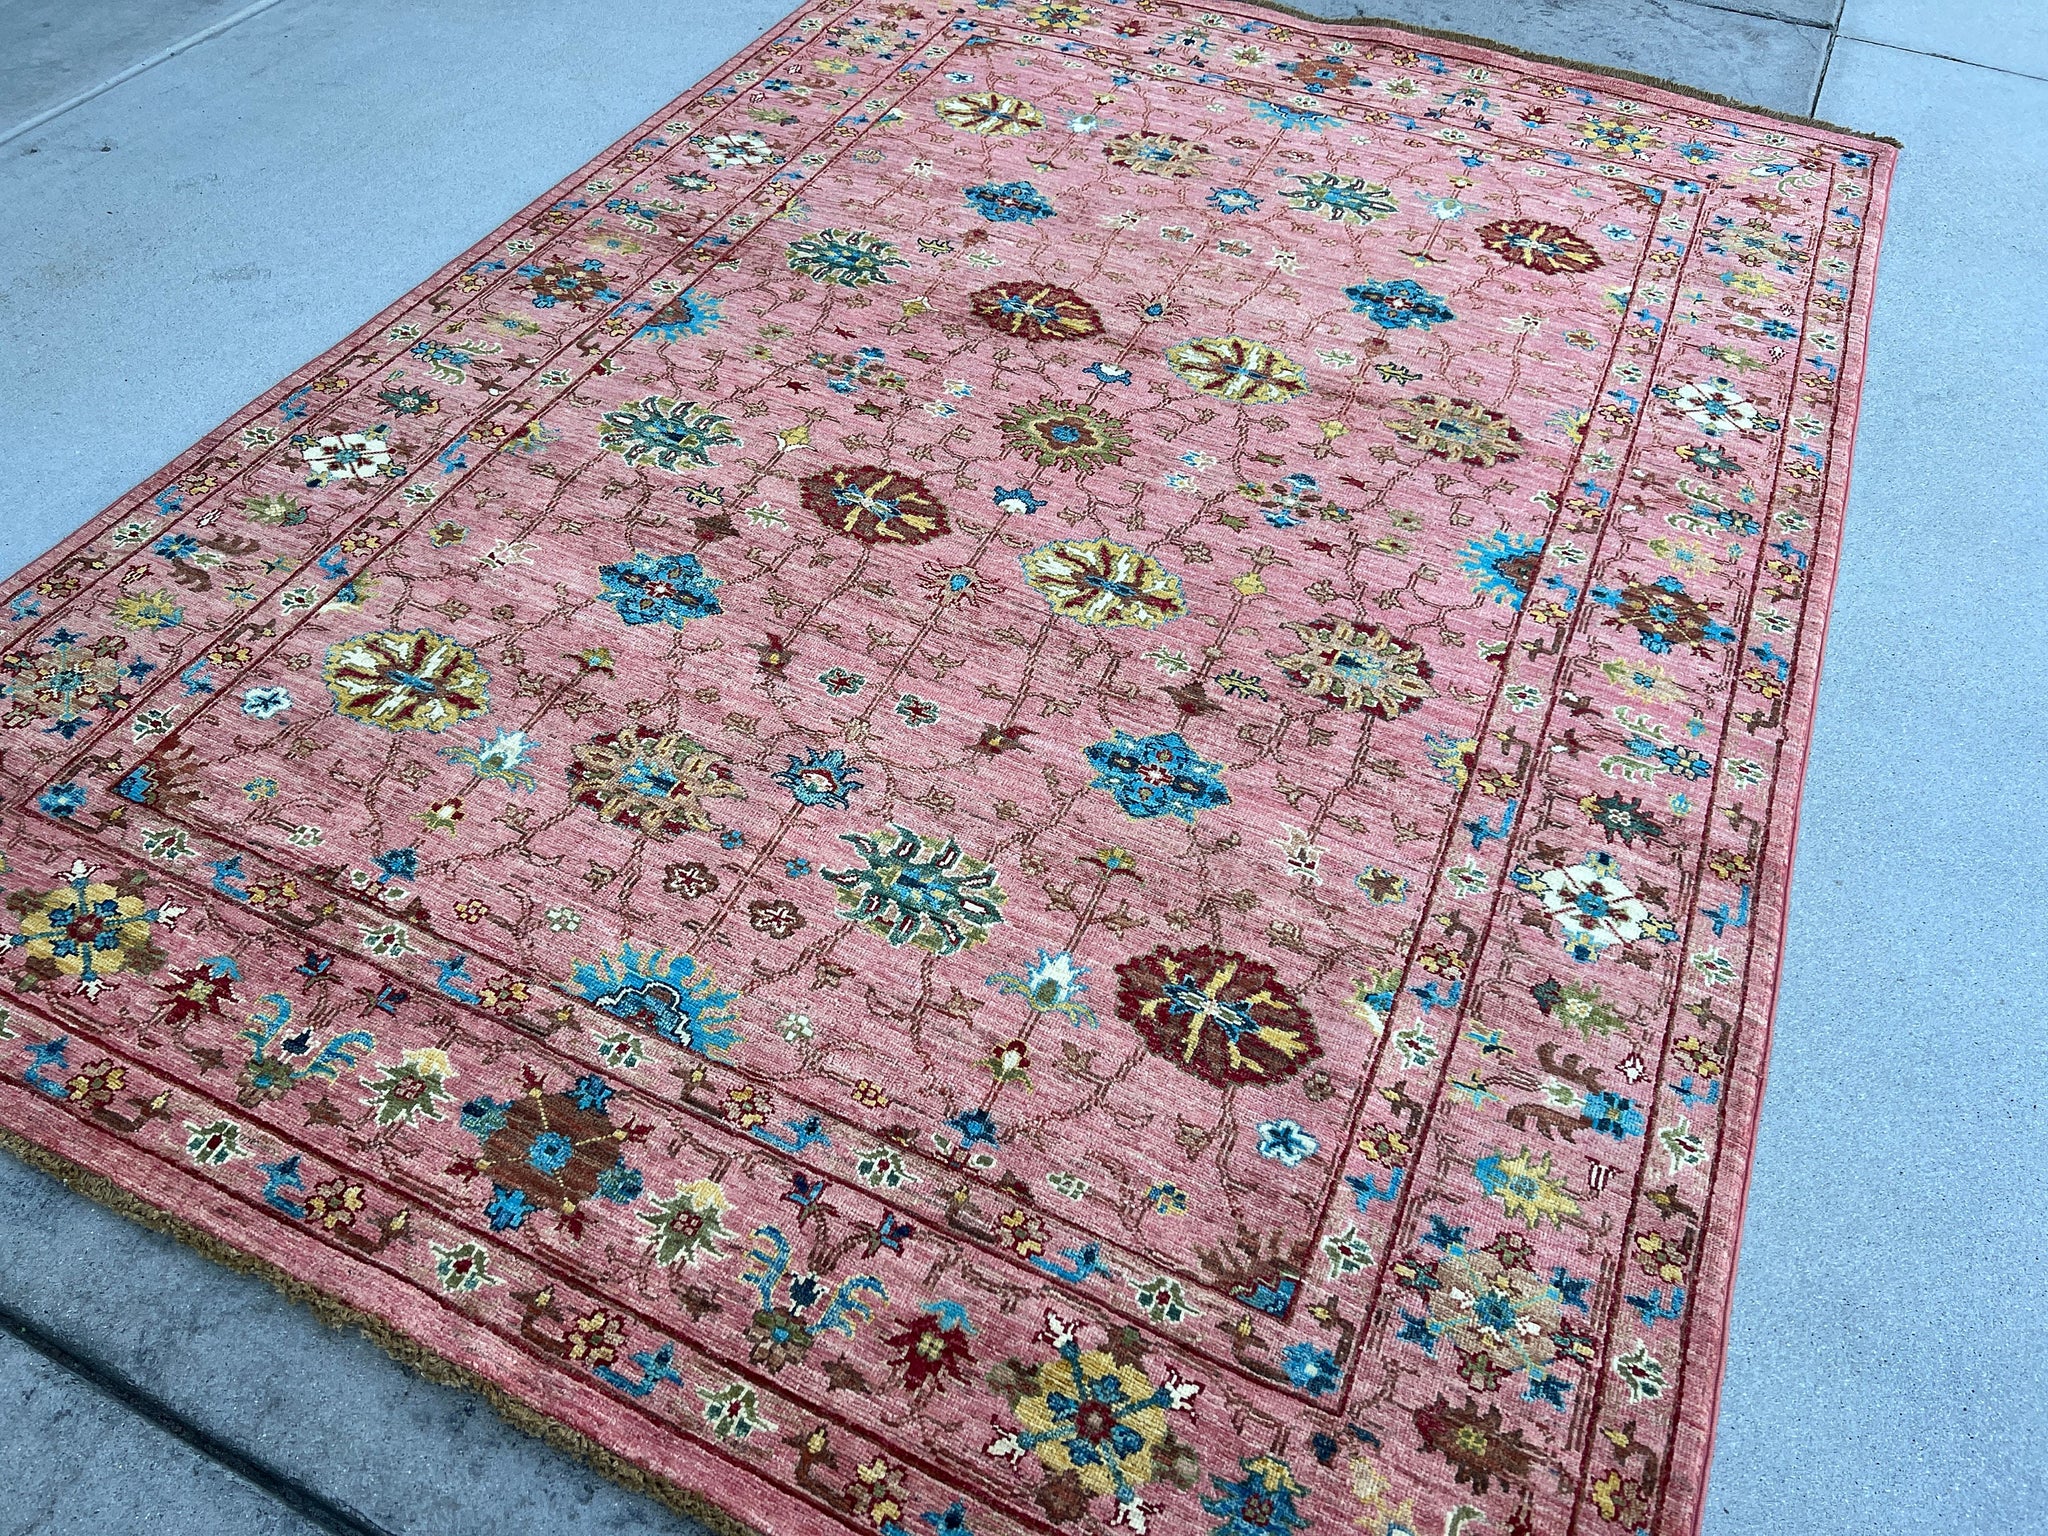 6x8 (180x245) Hand Knotted Handmade Afghan Rug | Blush Rose Pink Red Teal Chocolate Caramel Brown Caramel Ivory Cream Beige | Tribal Floral